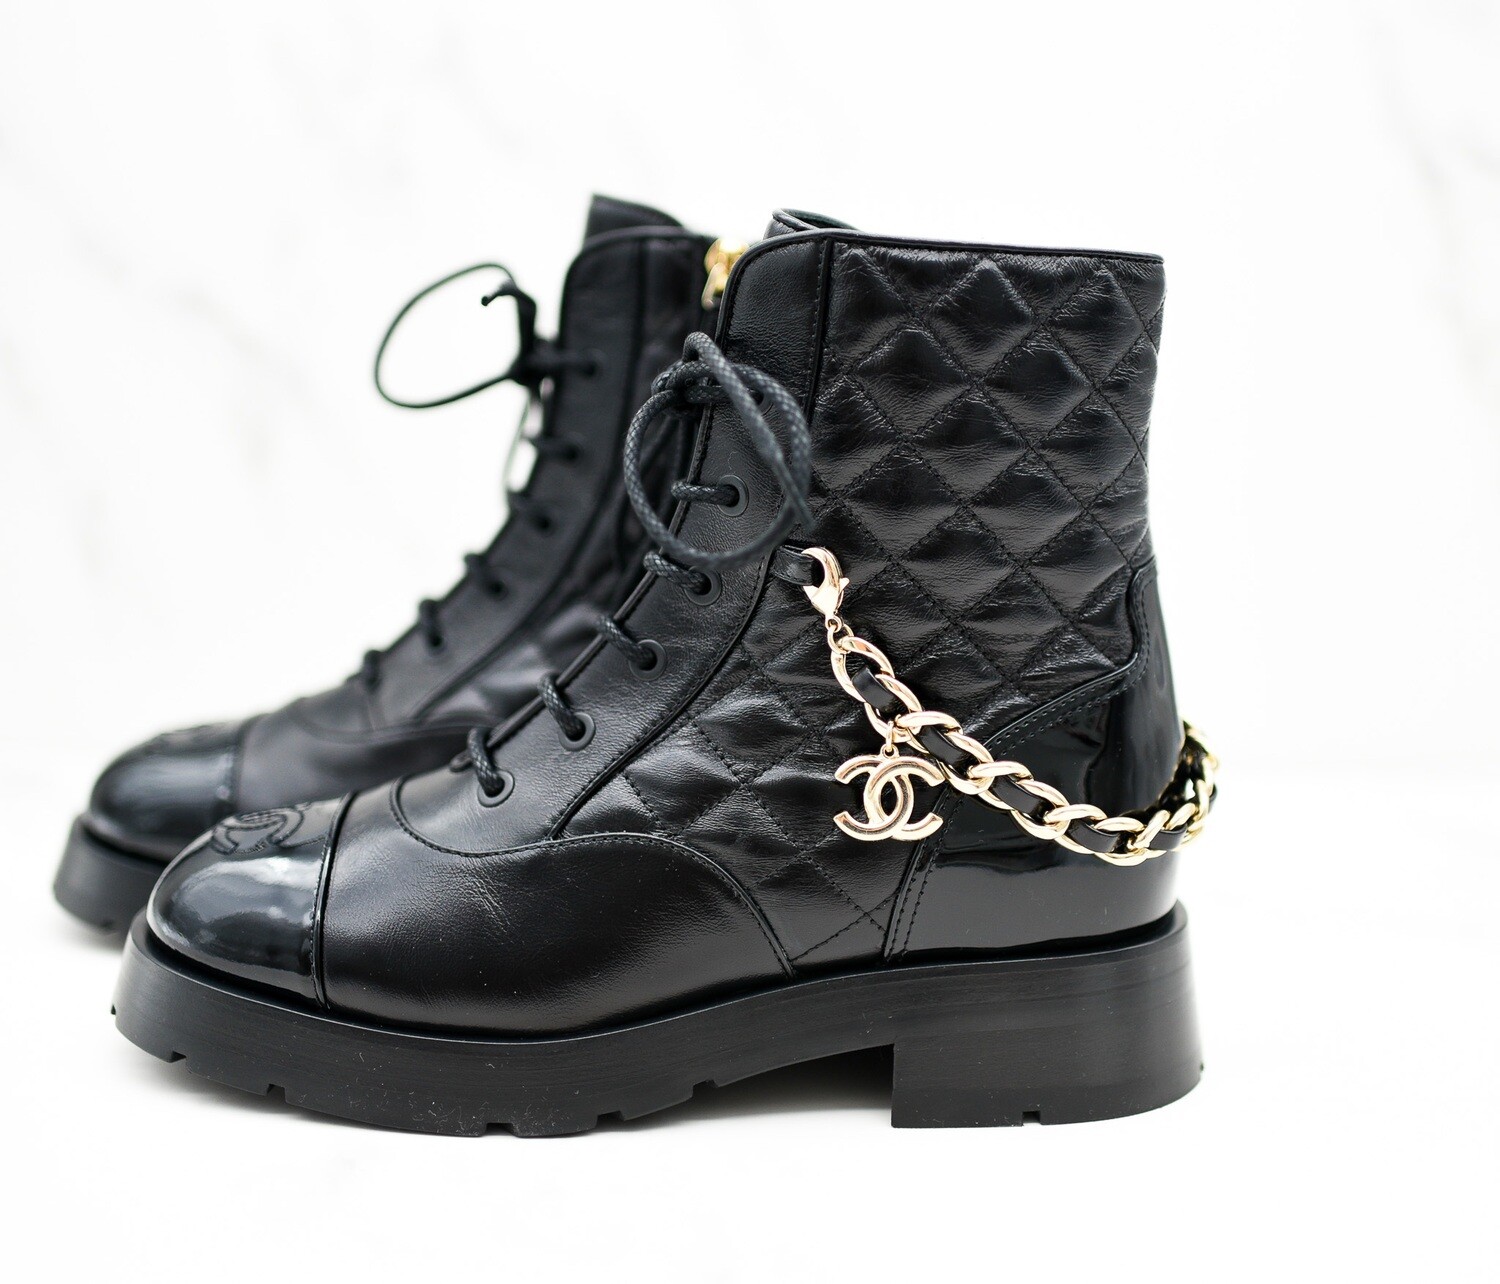 Chanel Patent Leather Heel Chain Boots in Black Size 38C